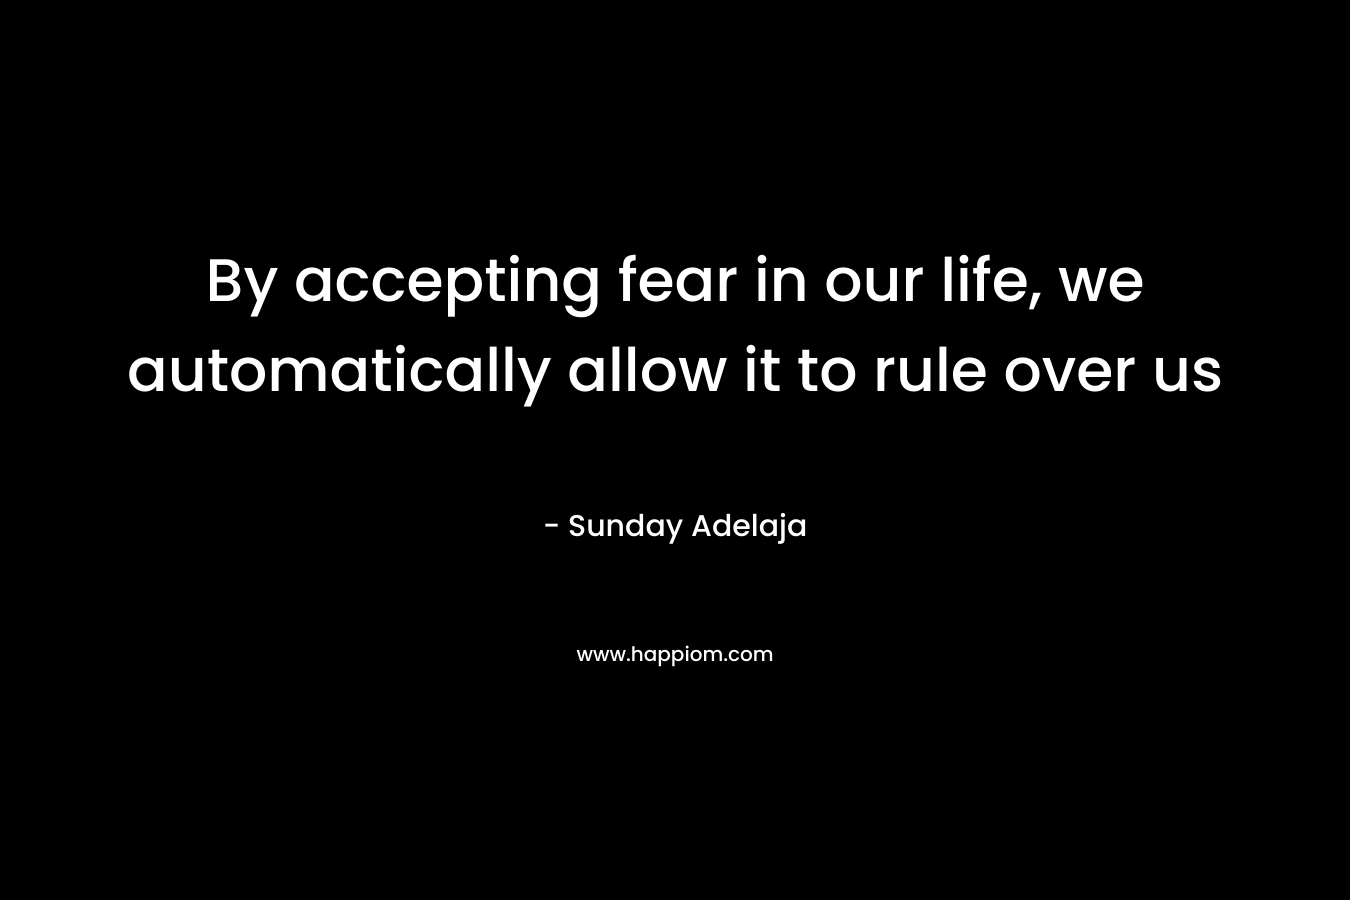 By accepting fear in our life, we automatically allow it to rule over us